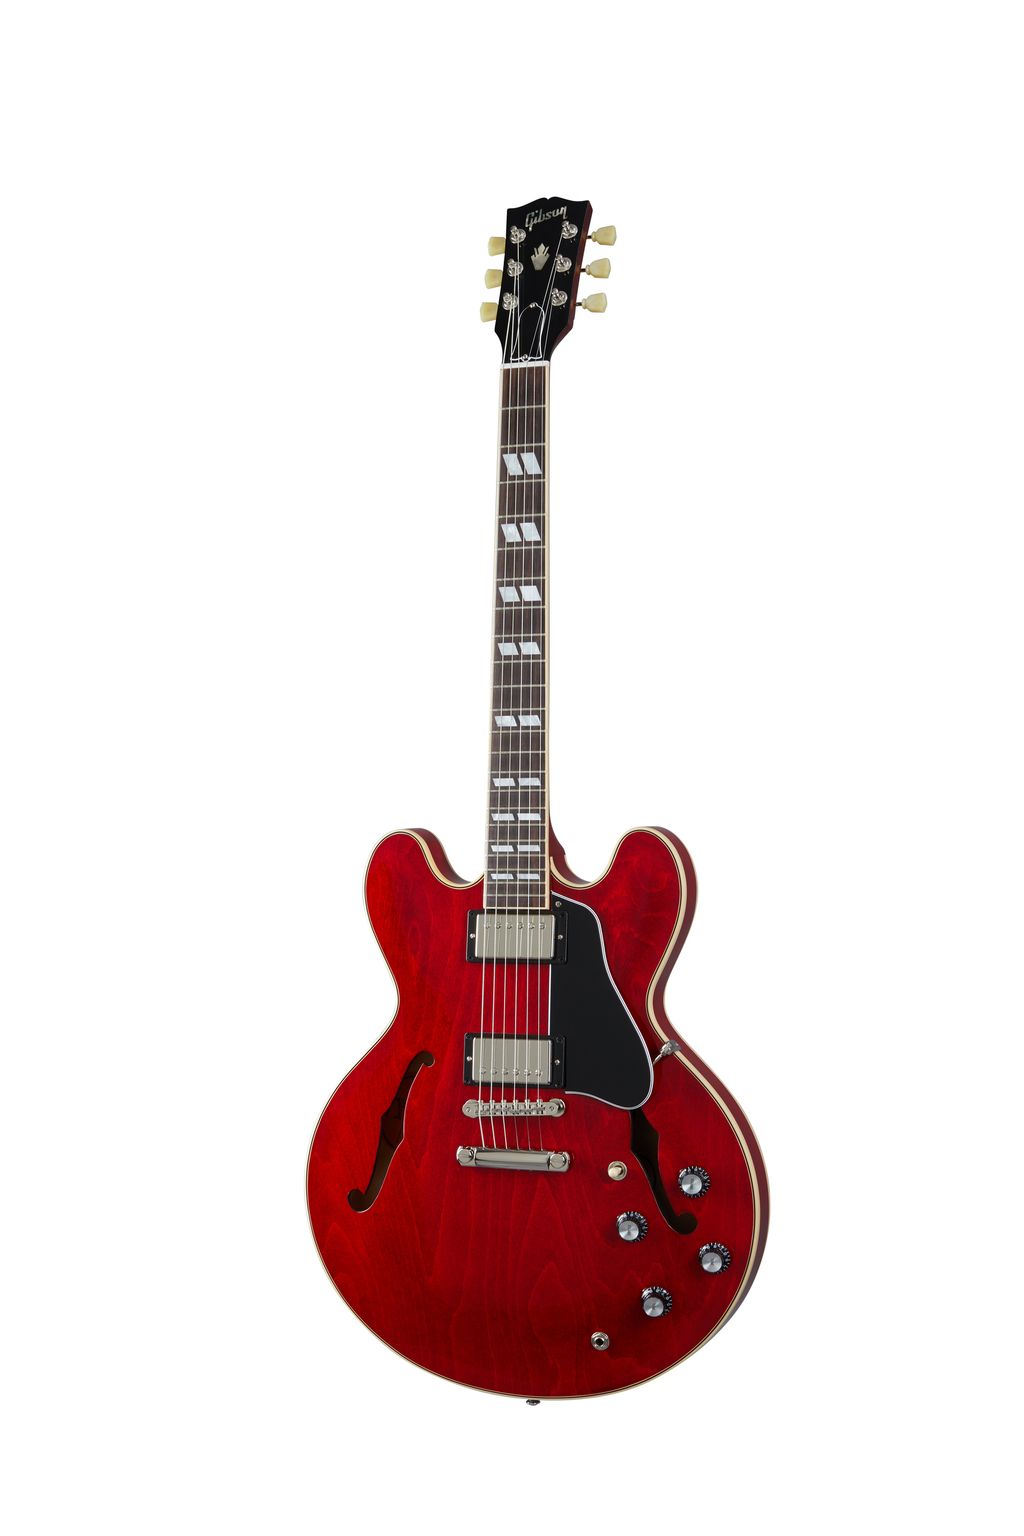 __static.gibson.com_product-images_USA_USABRA979_Sixties_Cherry_ES4500SCNH1_front